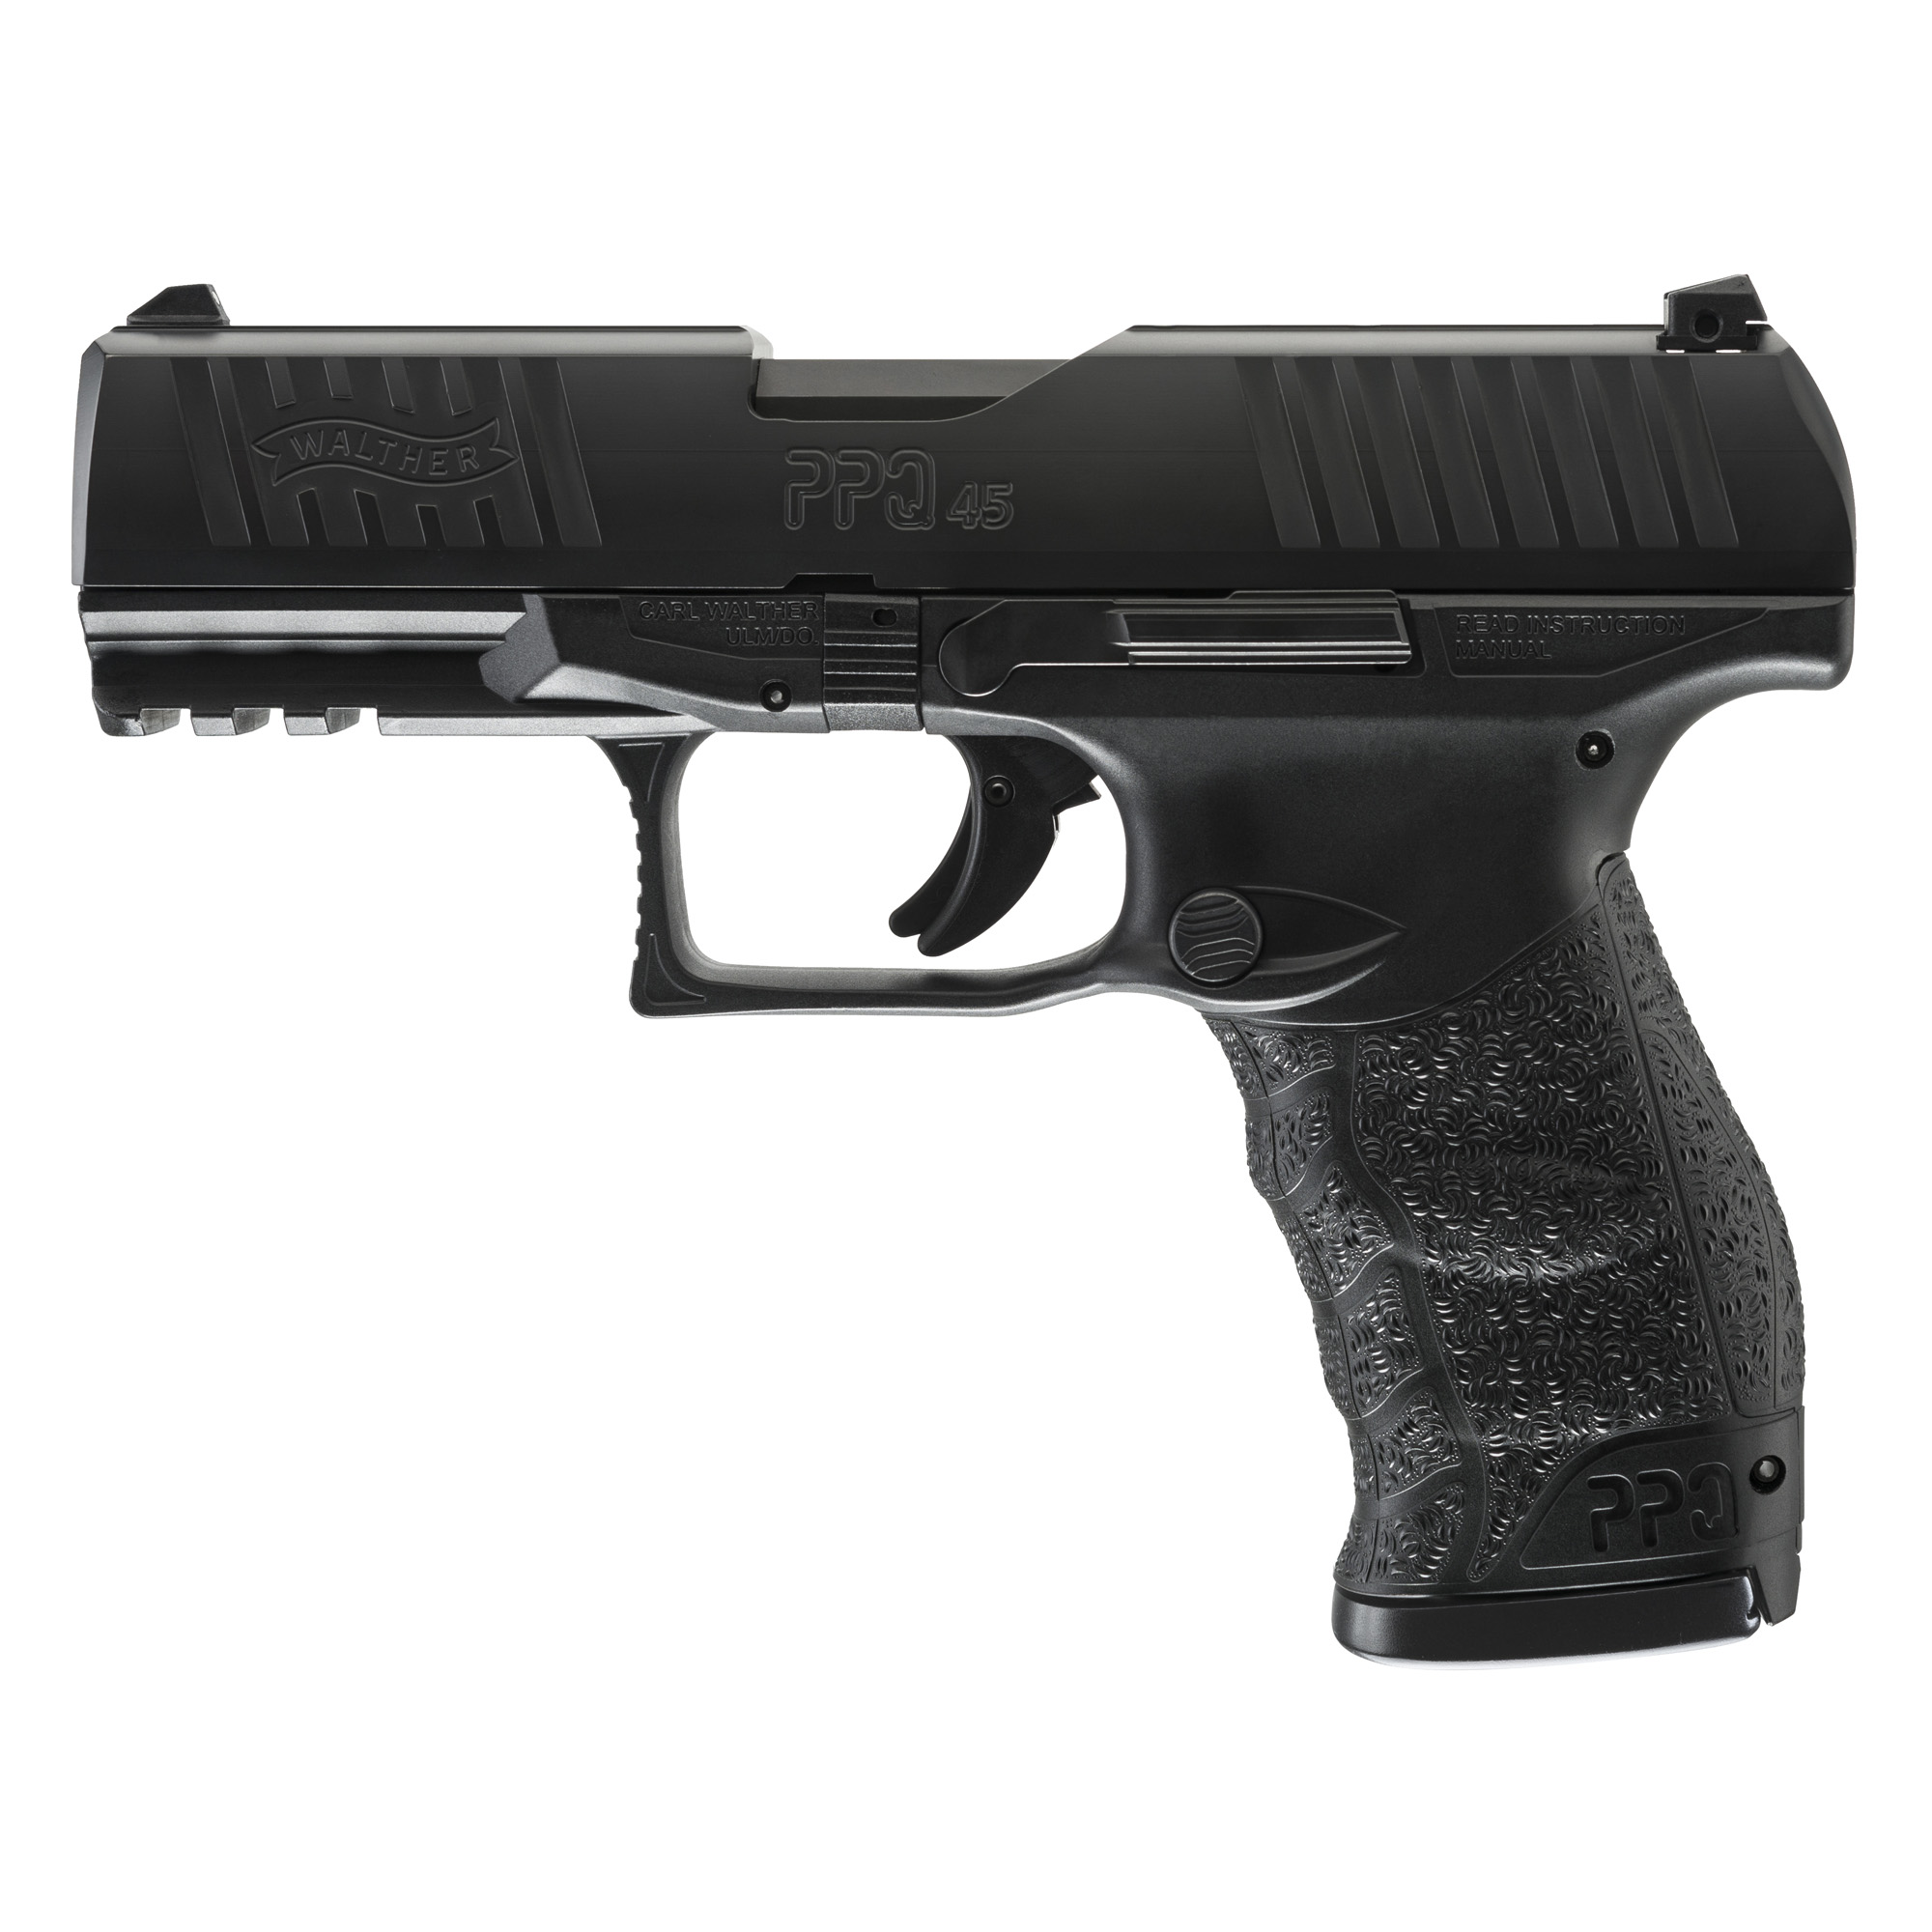 WALTHER PPQ M2 45ACP 4.25 10RD BLK